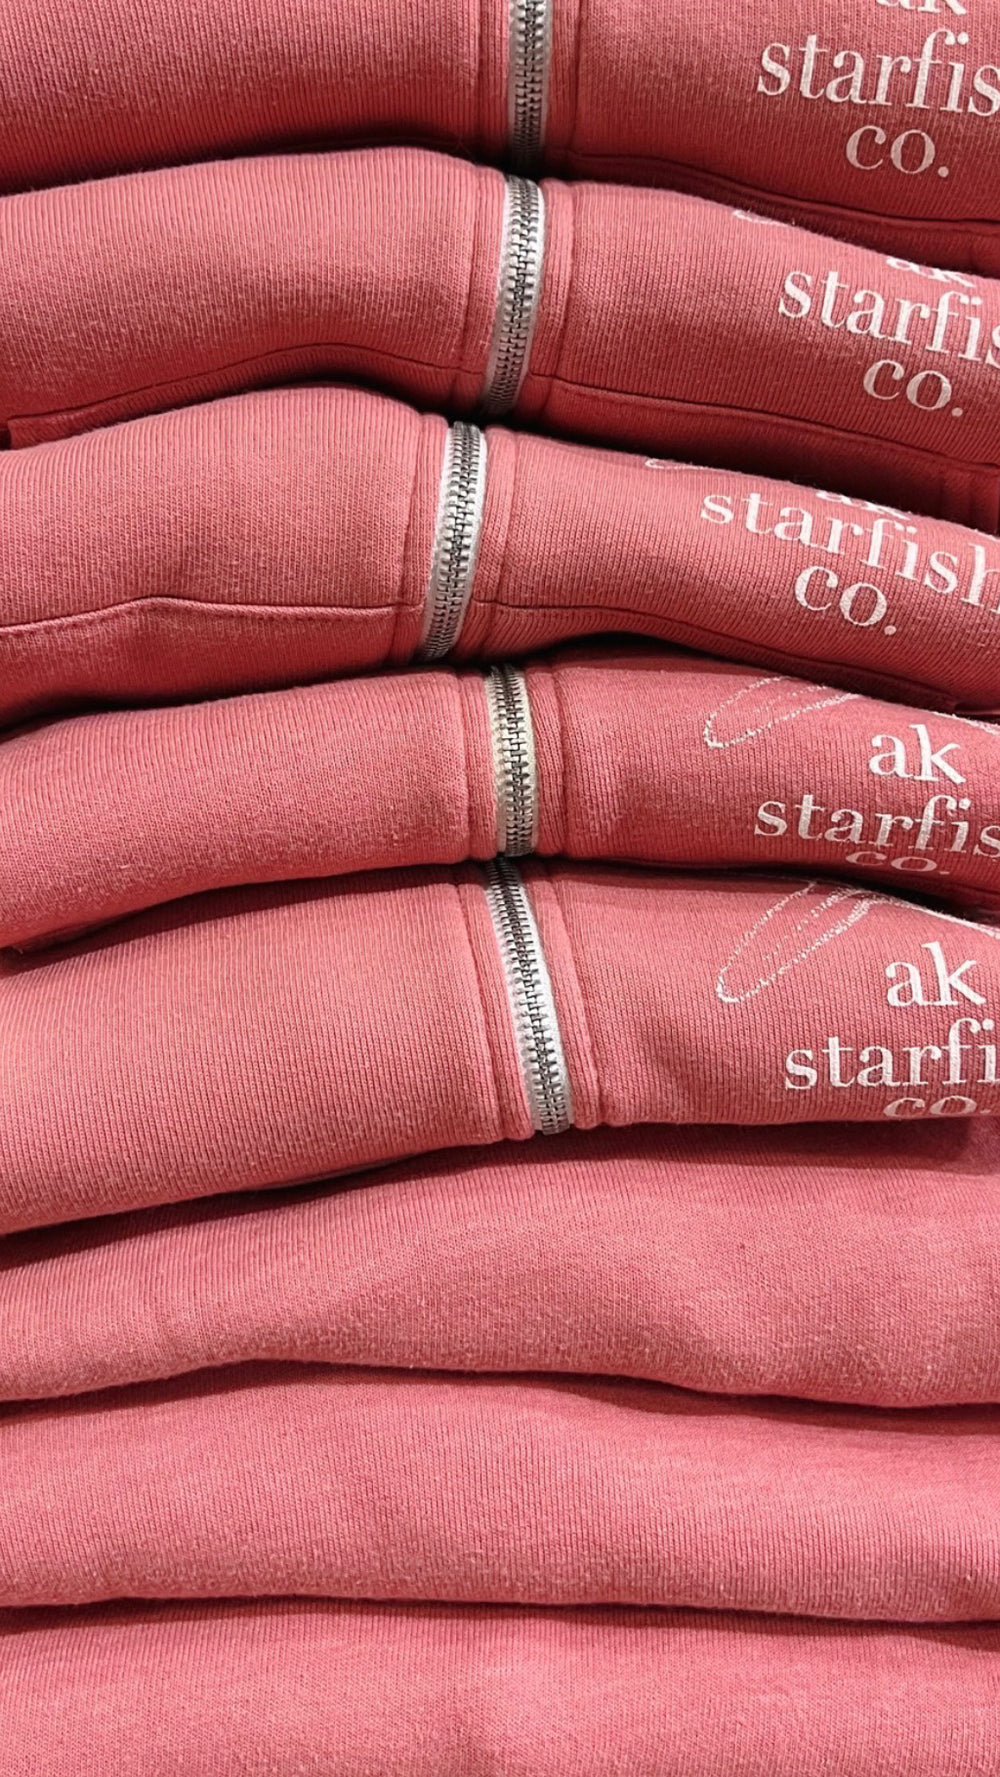 AK Starfish Co. Winter Pink Triblend Pullover Hoody